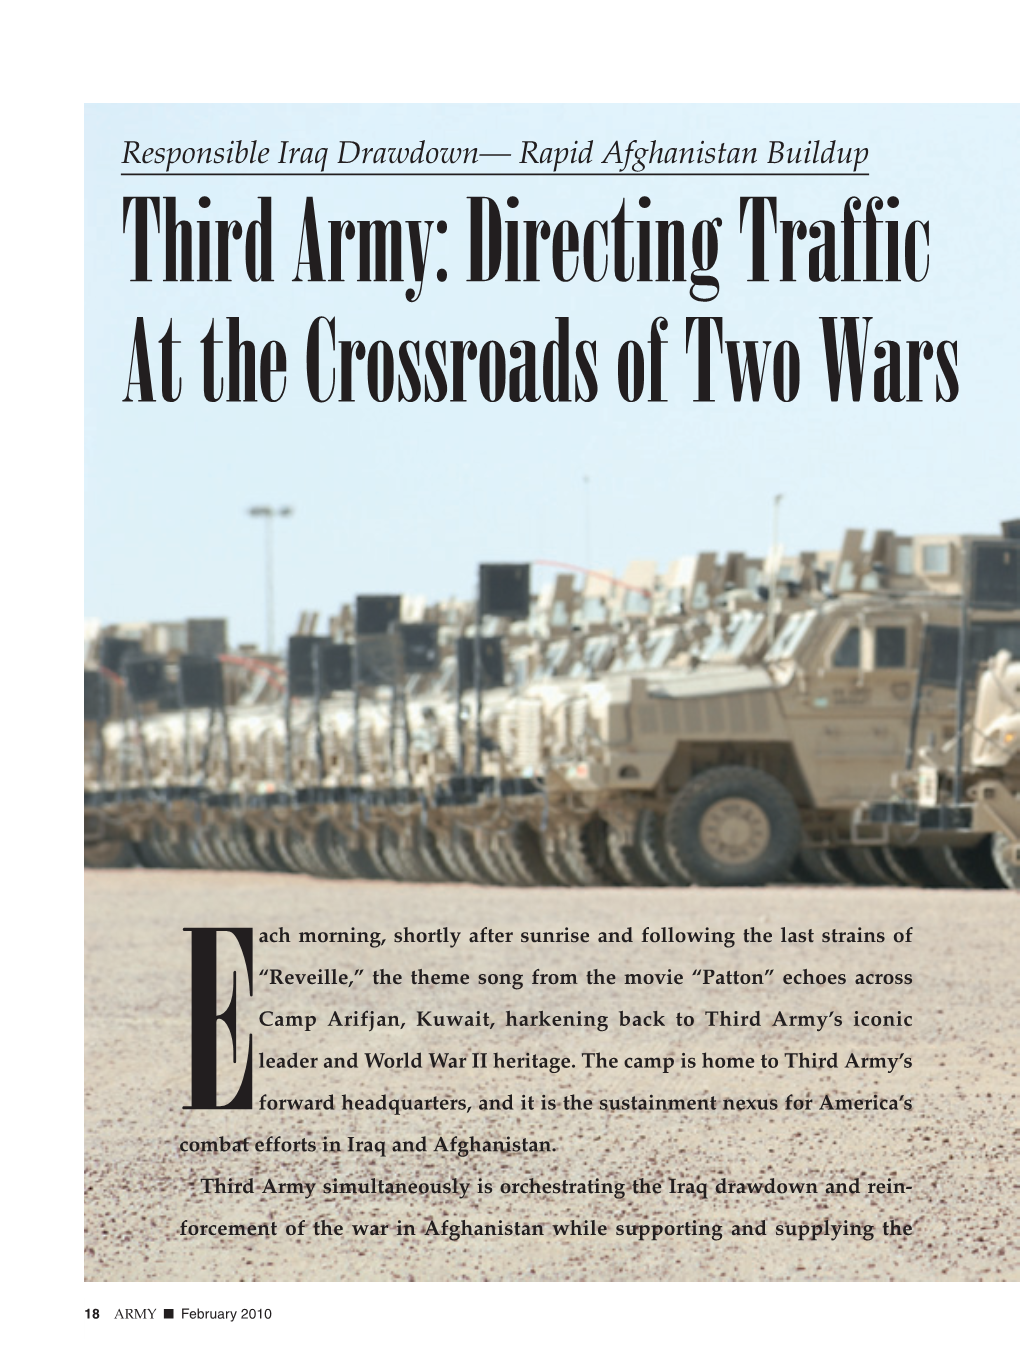 Third Army: Directing Traffic at the Crossroads of Two Wars